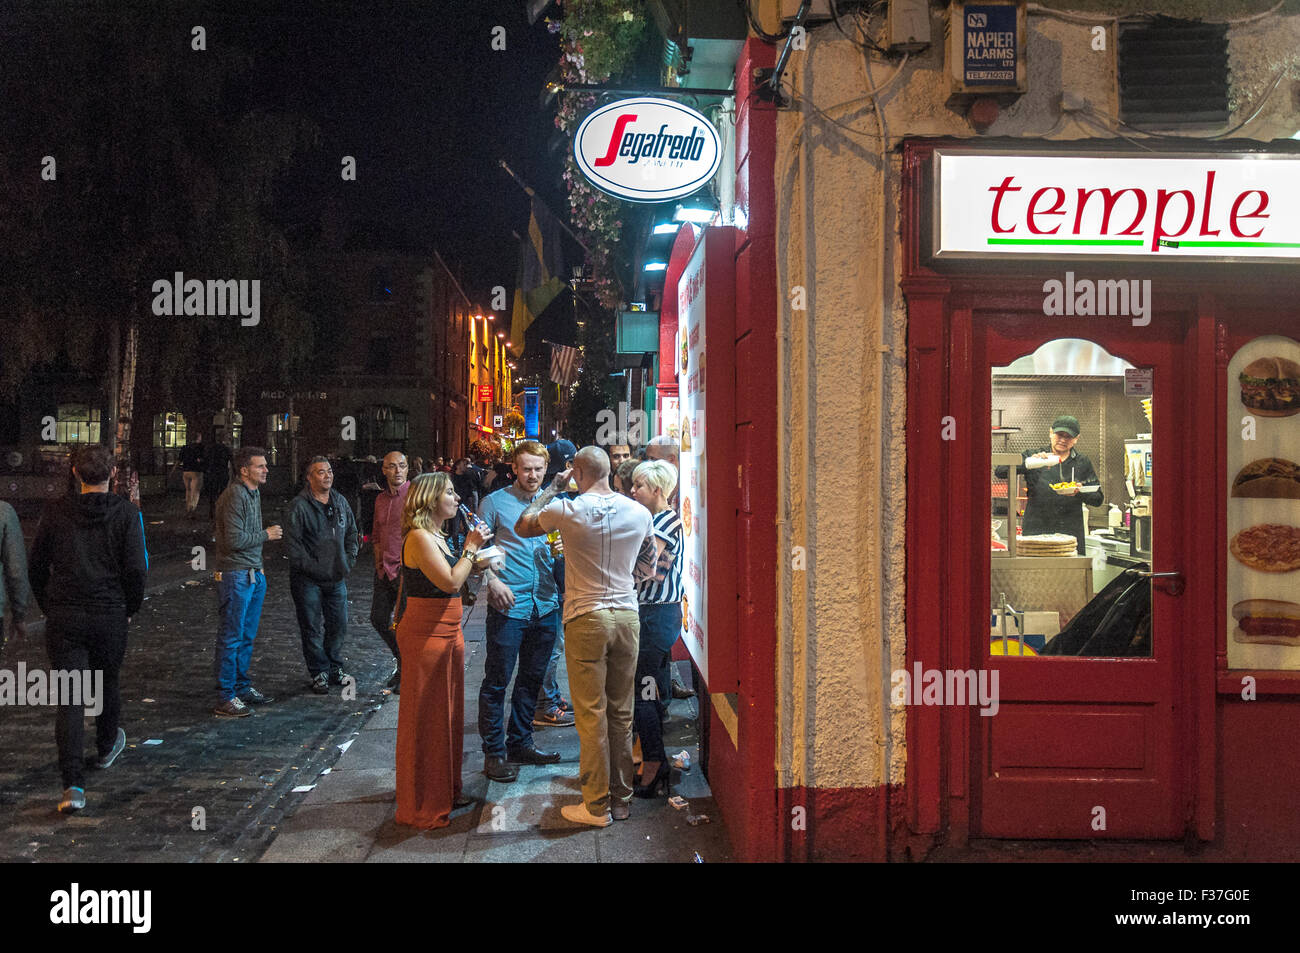 Temple Take Out late night fast food in Temple Bar, Dublin, Ireland Stock Photo